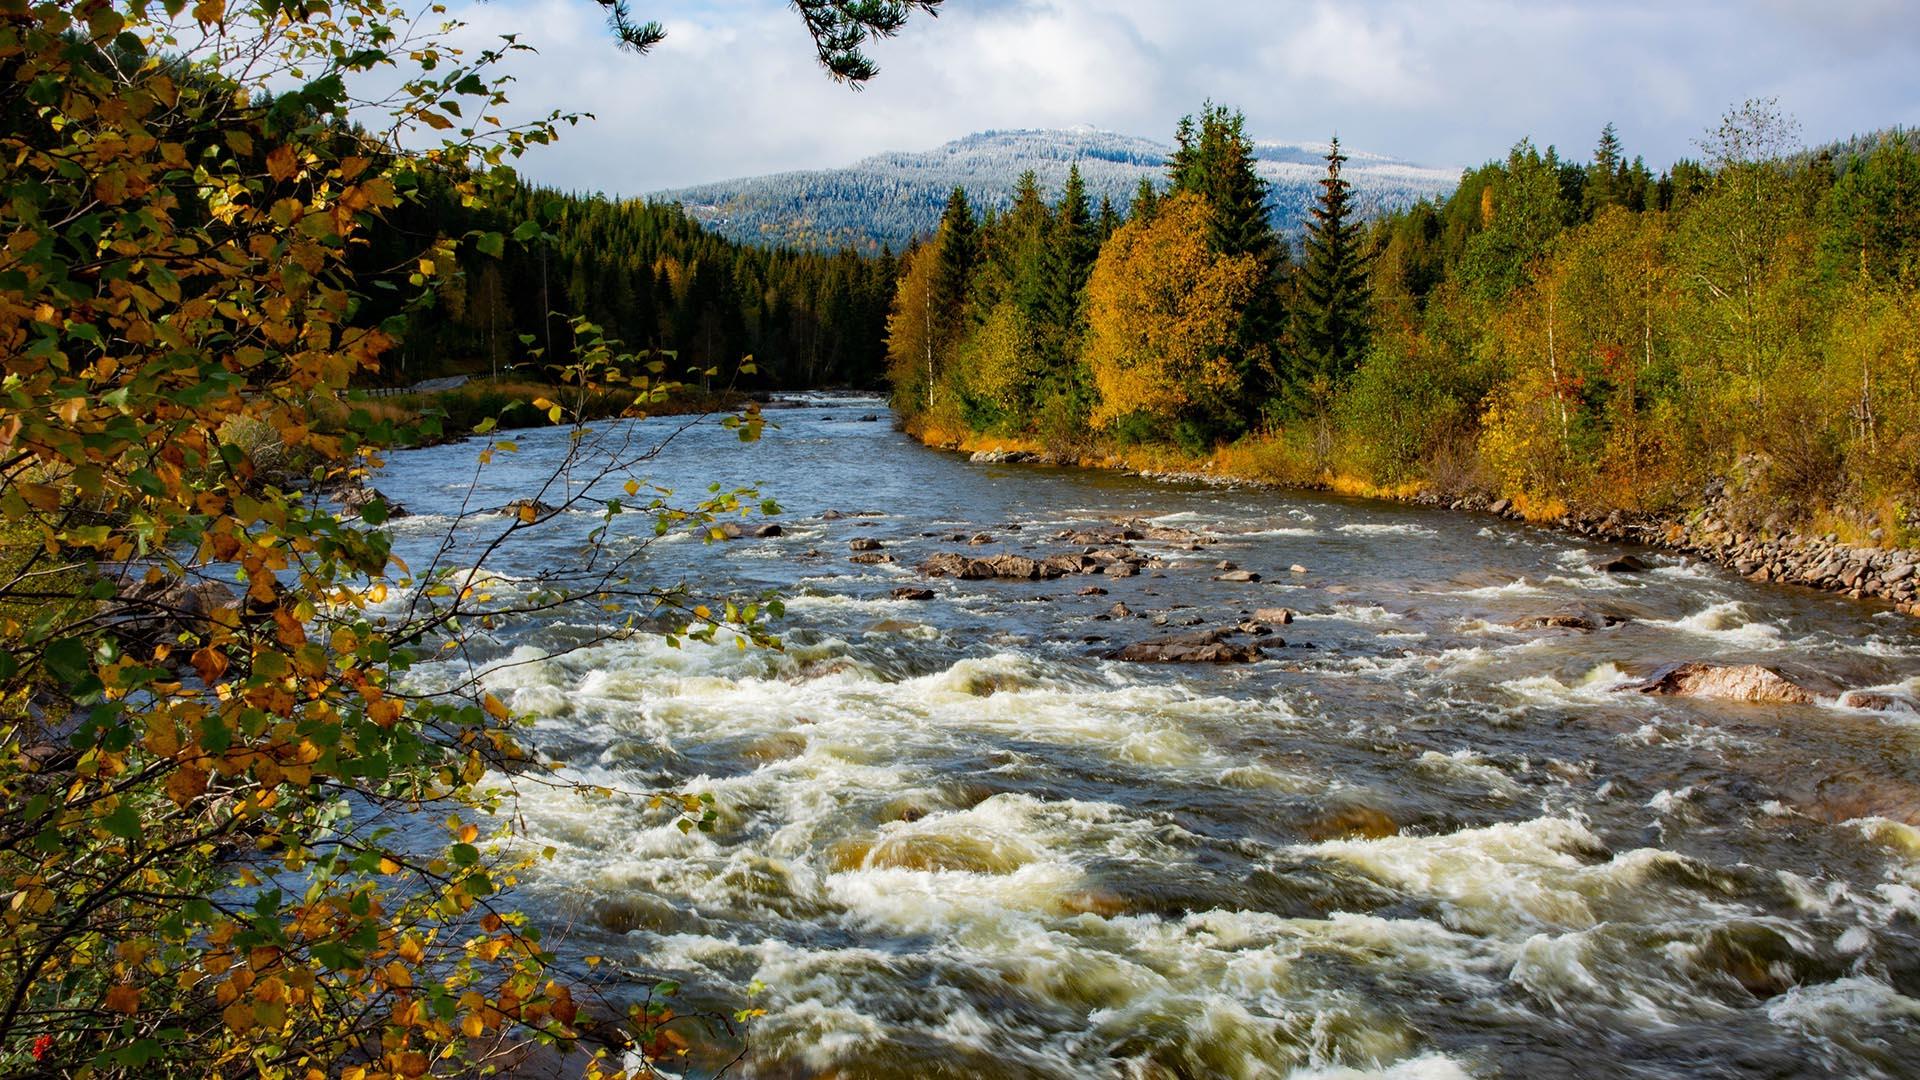 A river with rapids flows through autumn-coloured mixed forest. A mountain capped with new snow is seen in the far back.